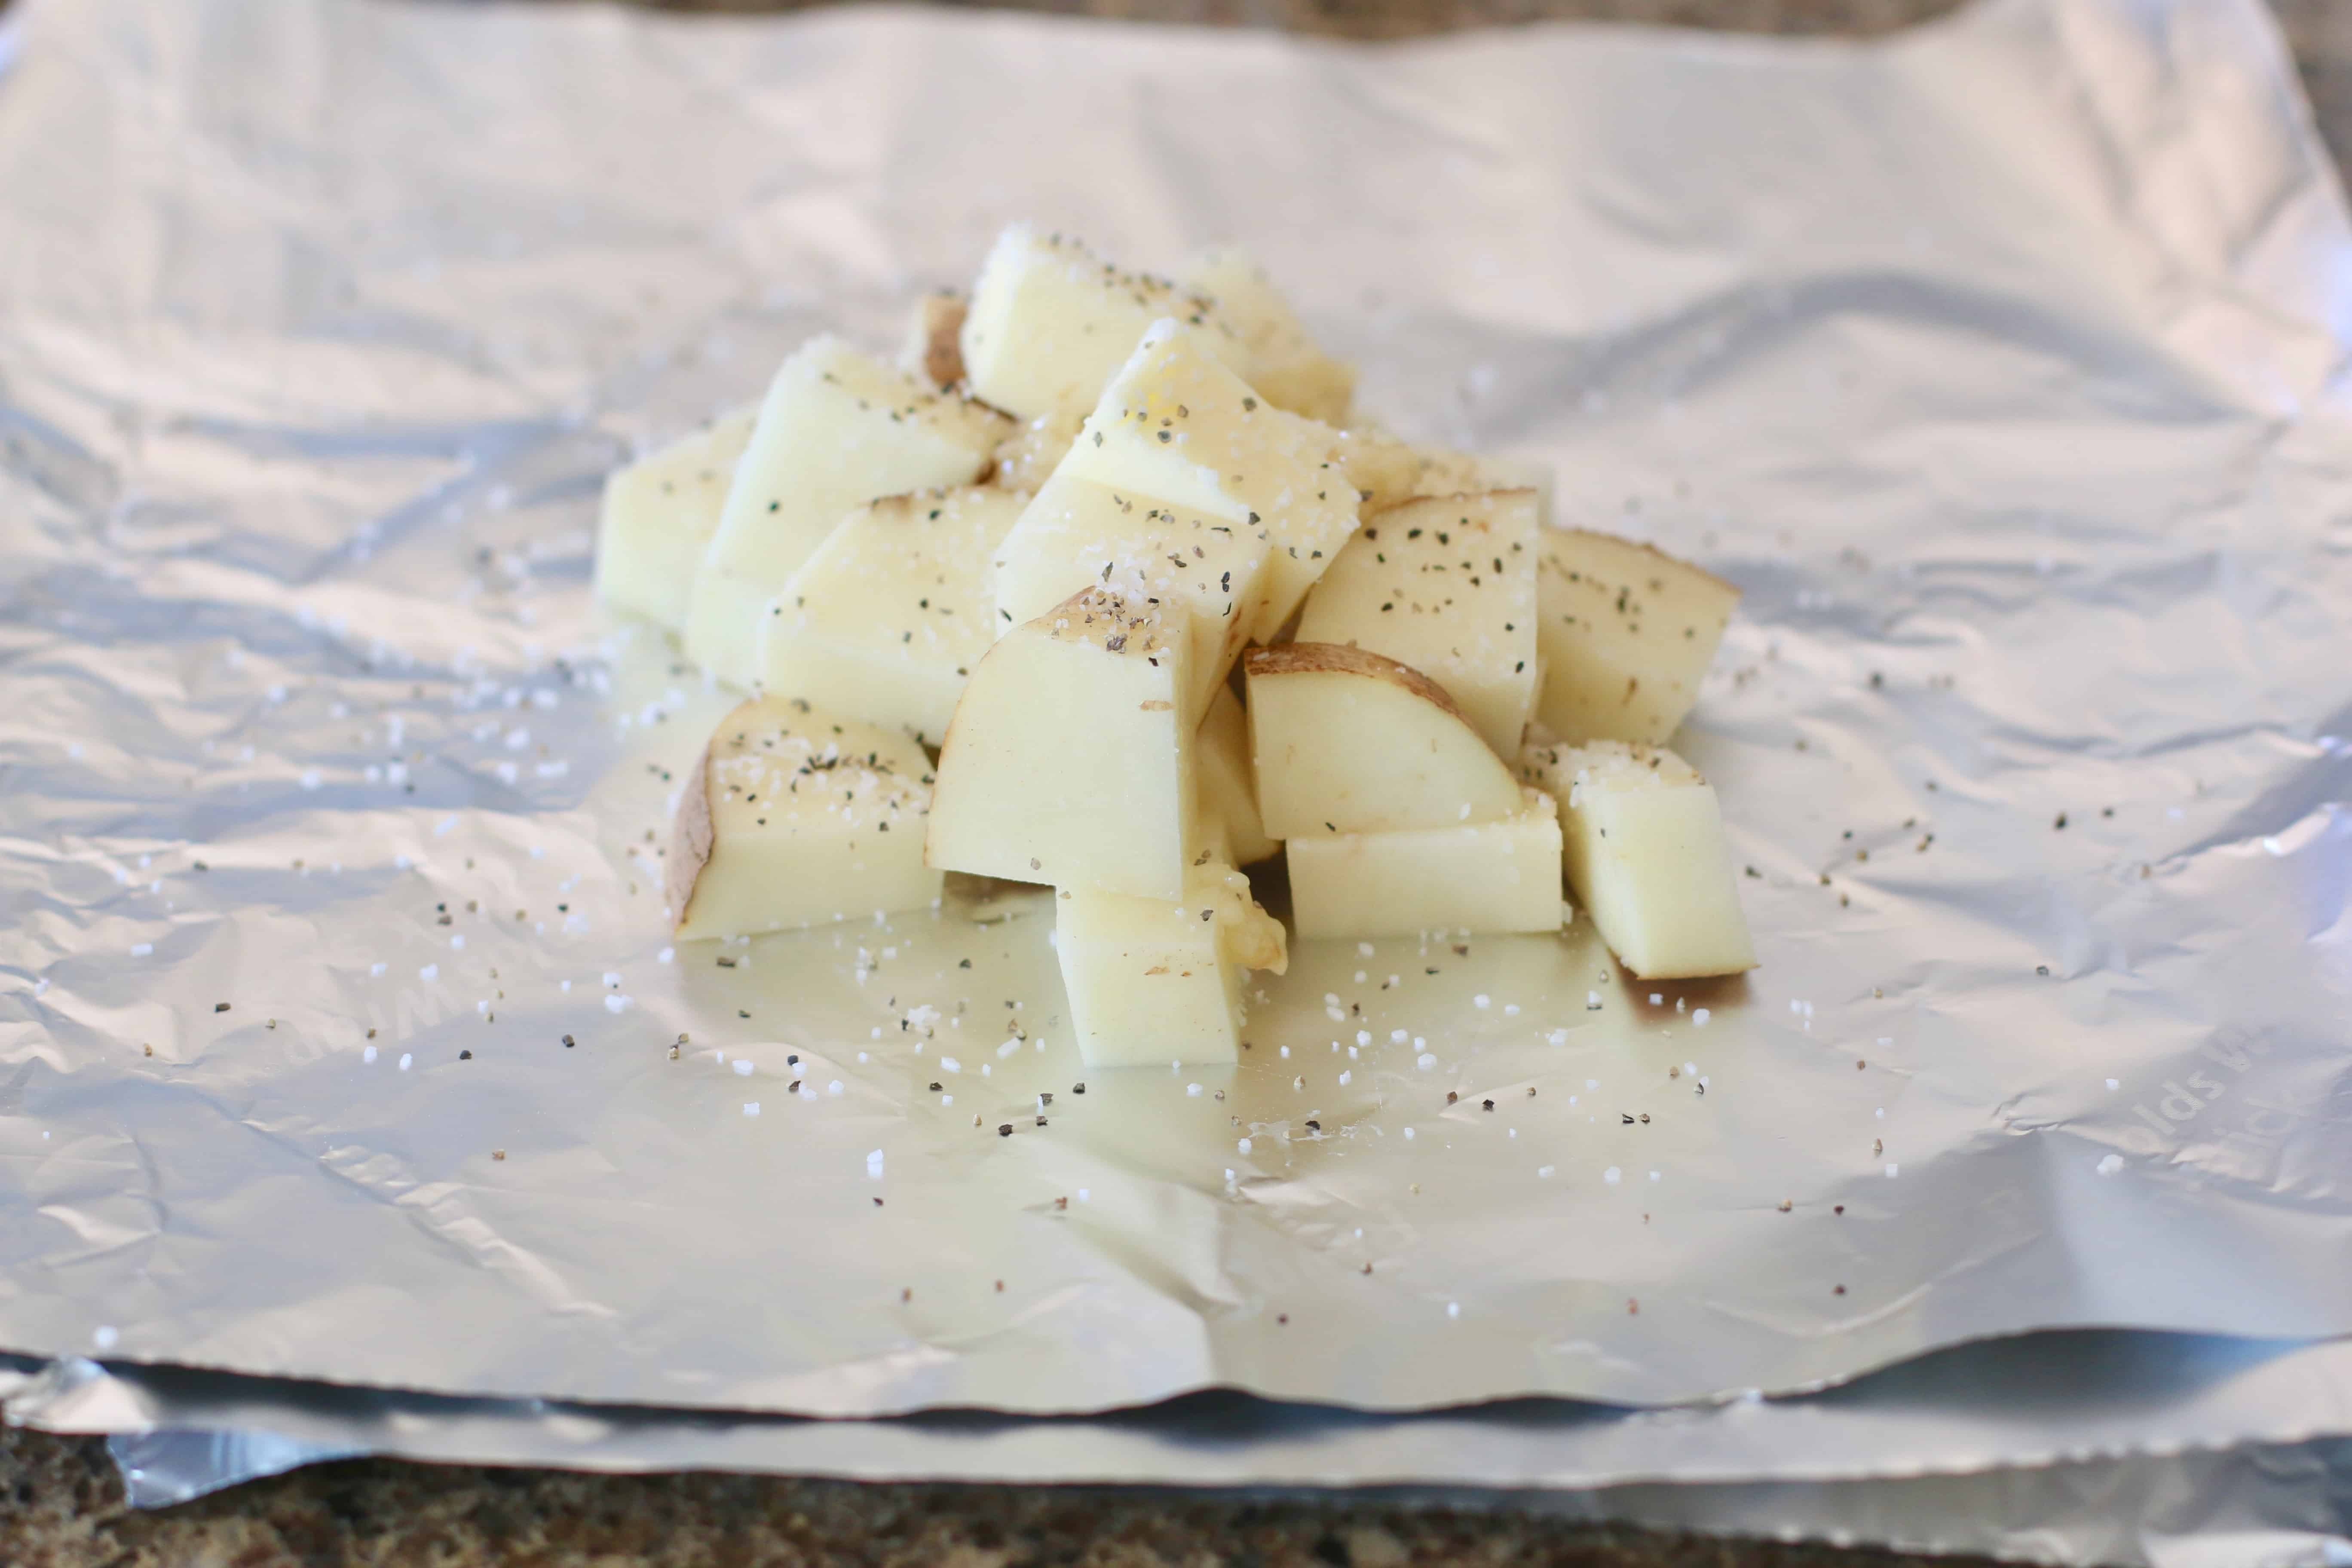 diced potatoes on aluminum foil with garlic, salt and pepper.